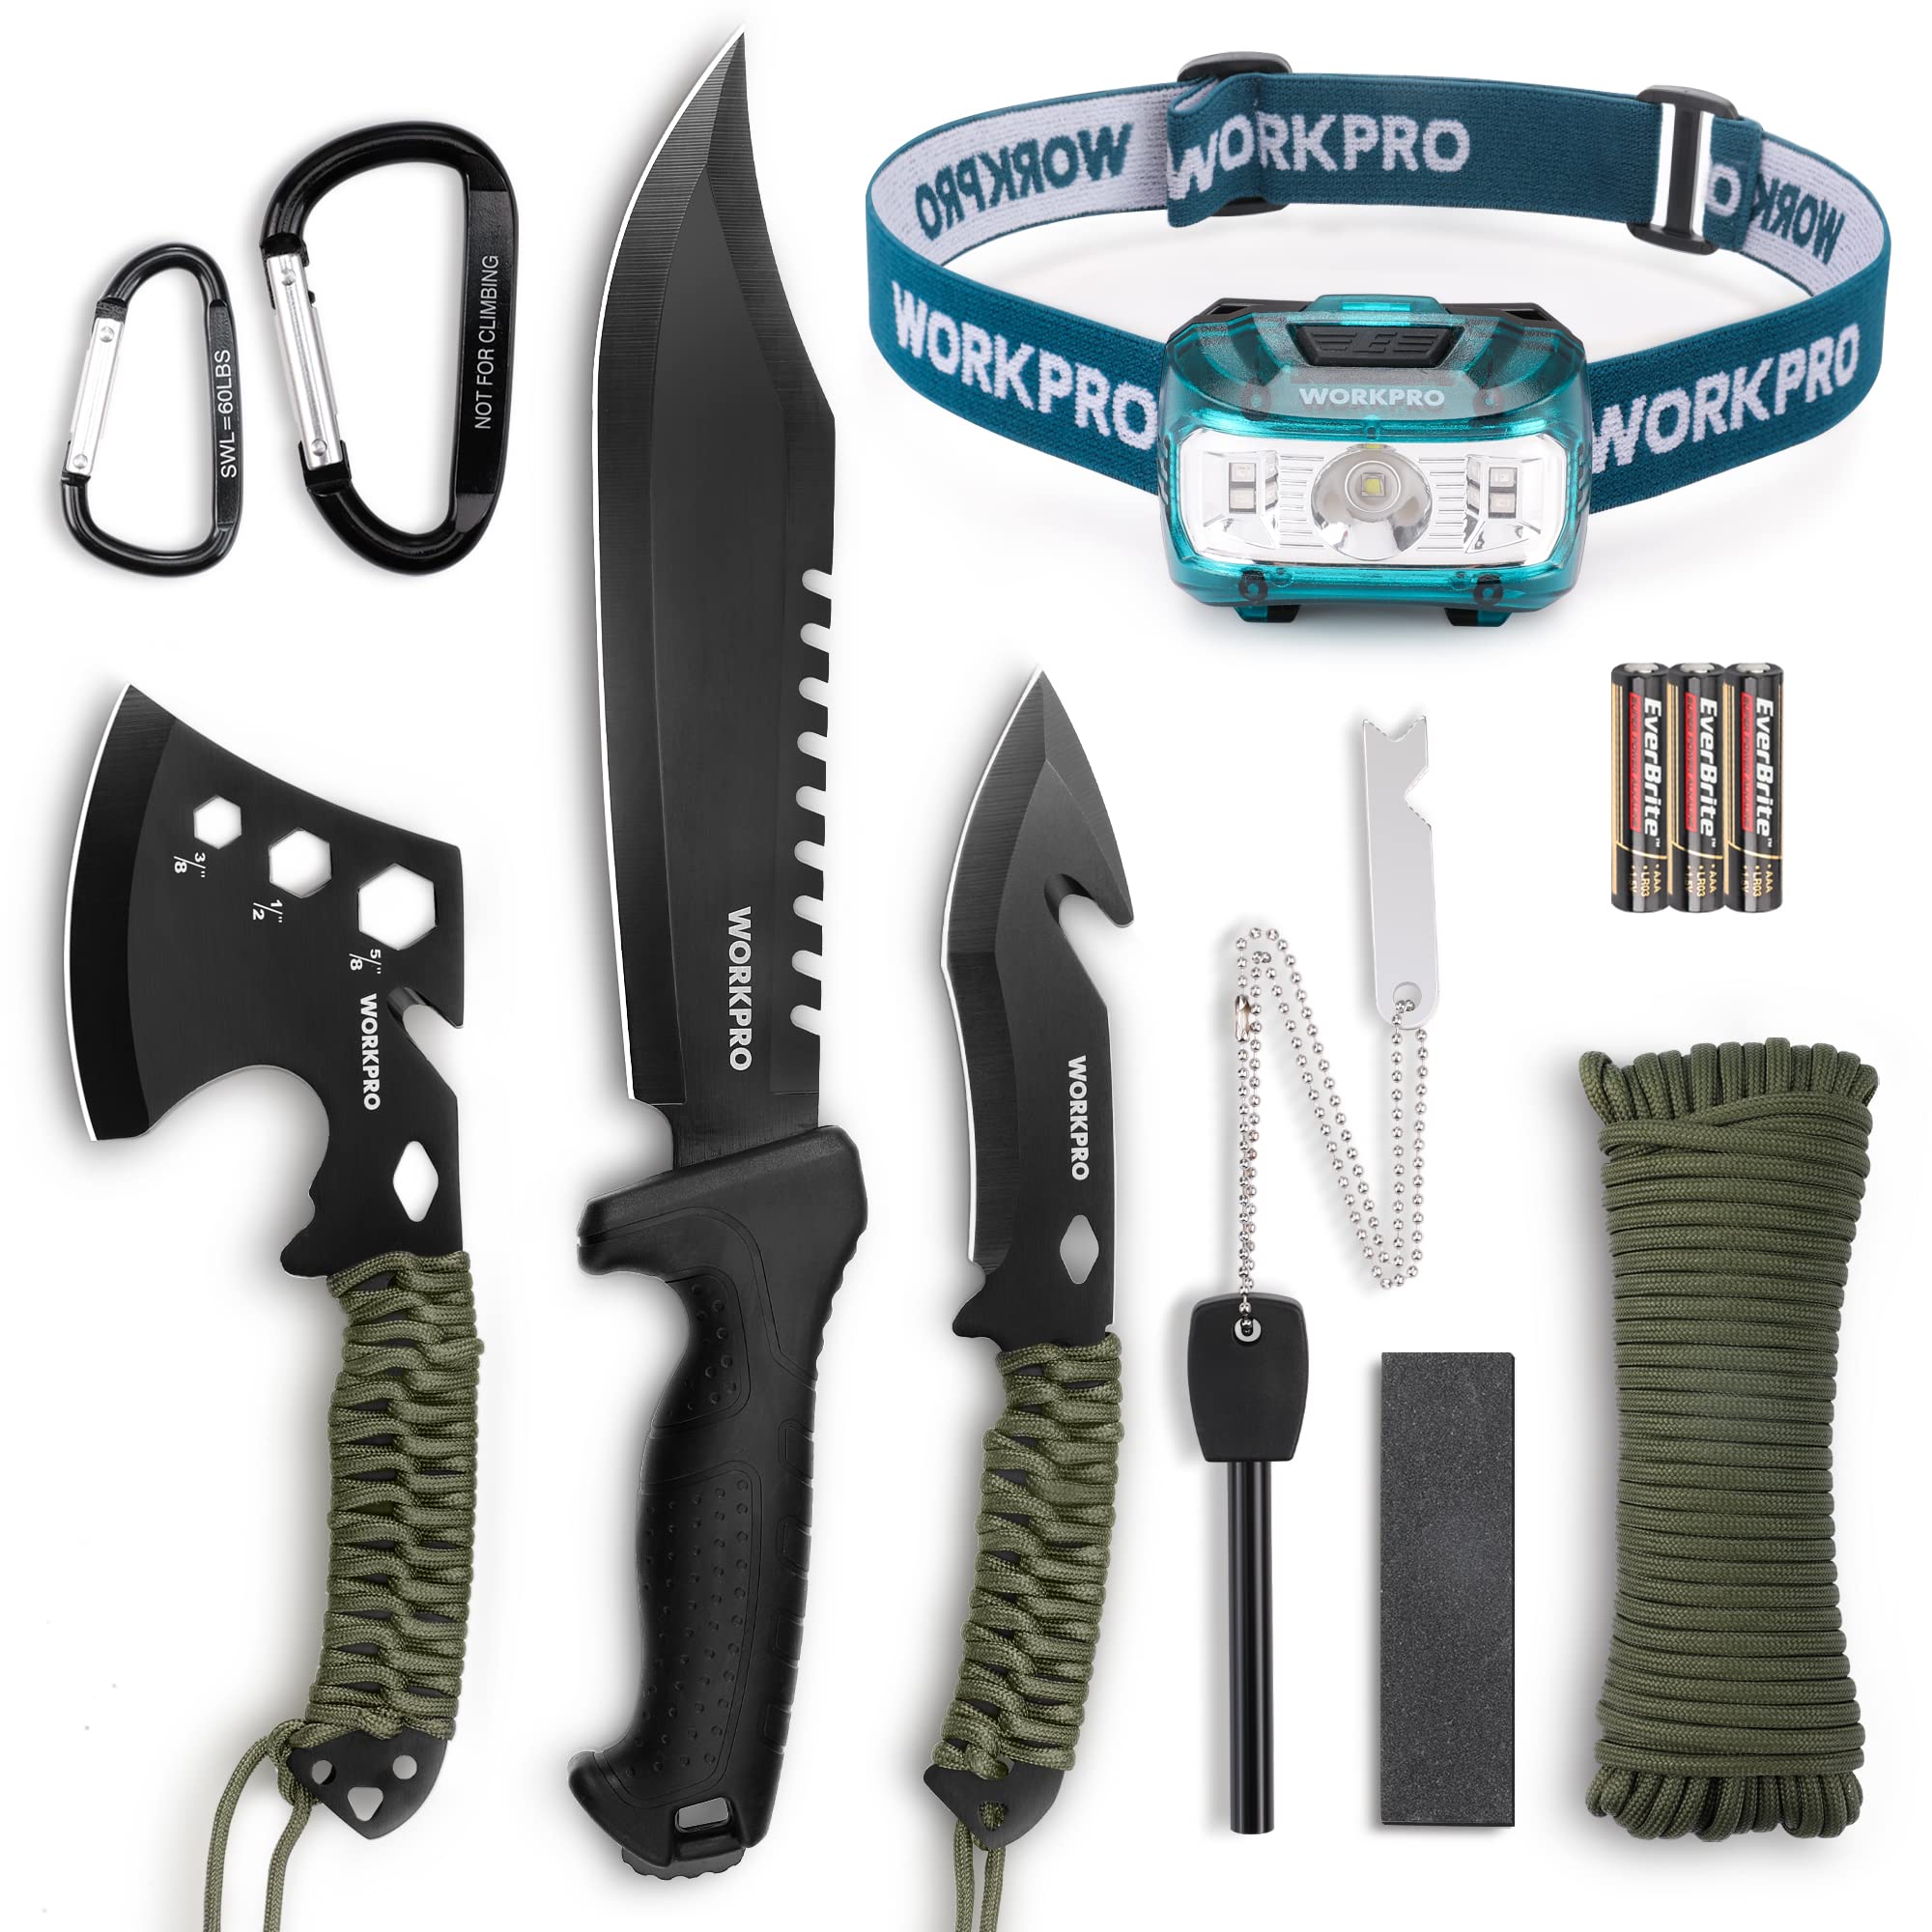 9 Piece Set WORKPRO Camping Hatchet & Machete with Sheath, Axe and Fixed Blade Hunting Knives, Headlamp, Flint $37.99 + Free Shipping